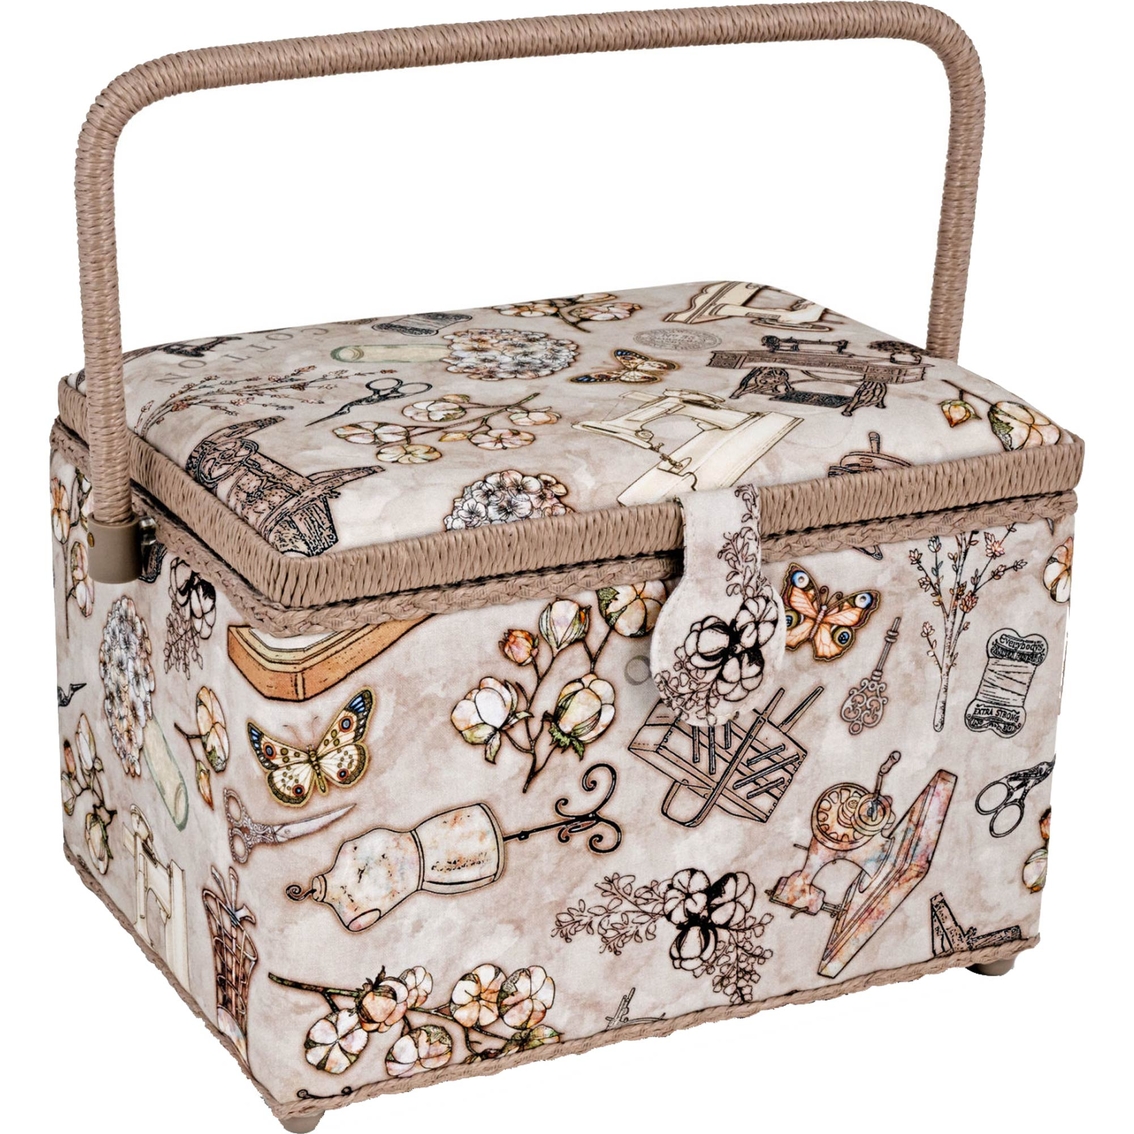 Dritz Rectangular Sewing Basket with Zippered Case, Large - Image 2 of 7